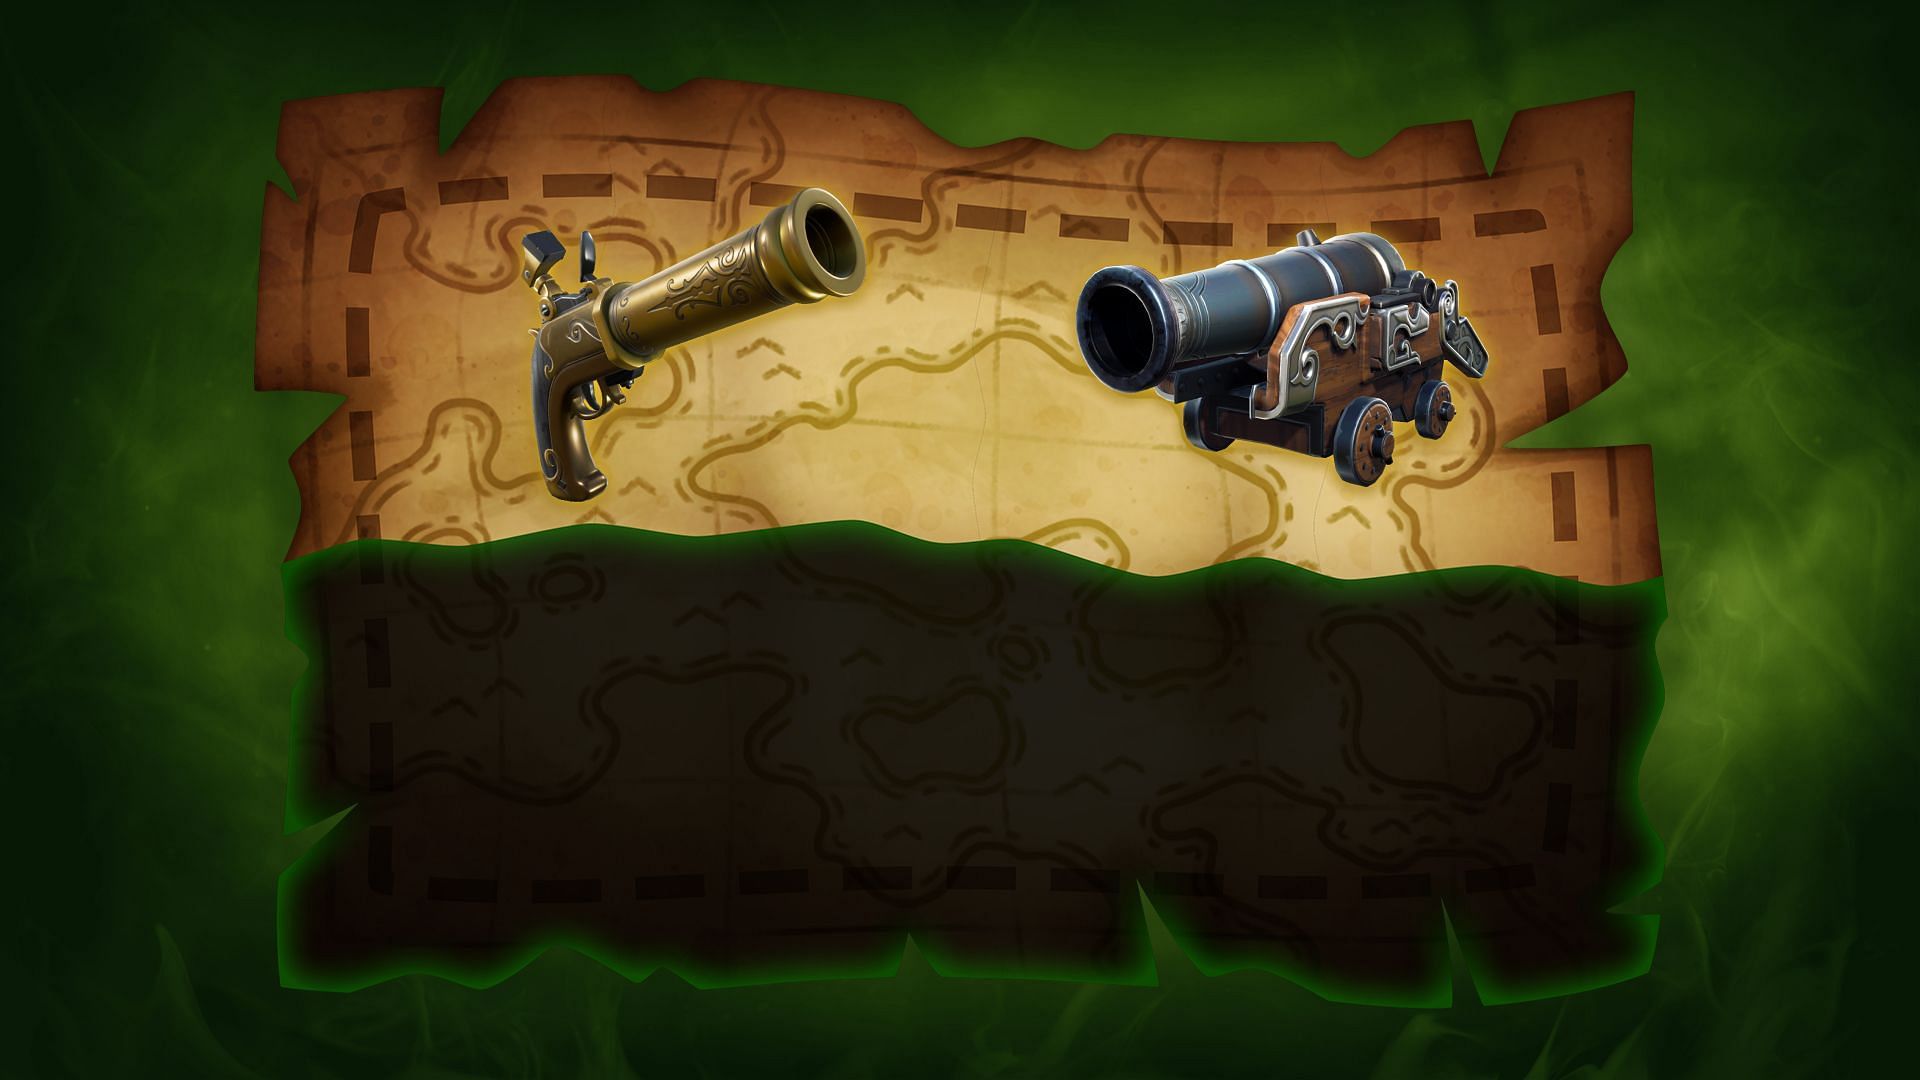 Pirate Cannons confirmed to return for Fortnite Pirates of the Caribbean collaboration